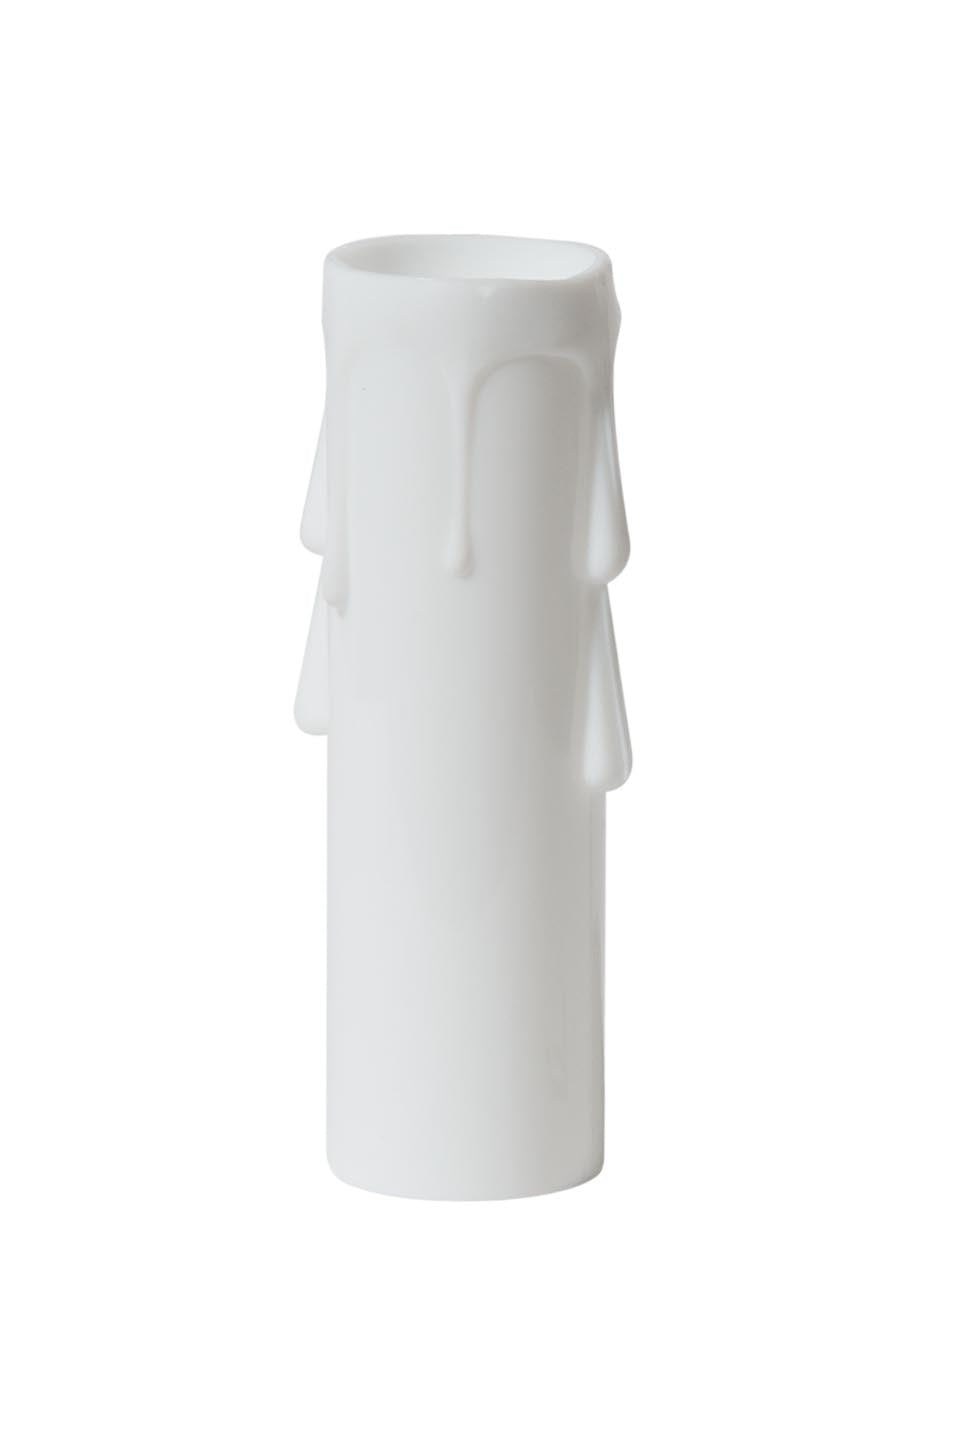 White Color Plastic Candelabra Candle Cover, 3 or 4 Inch Sizes